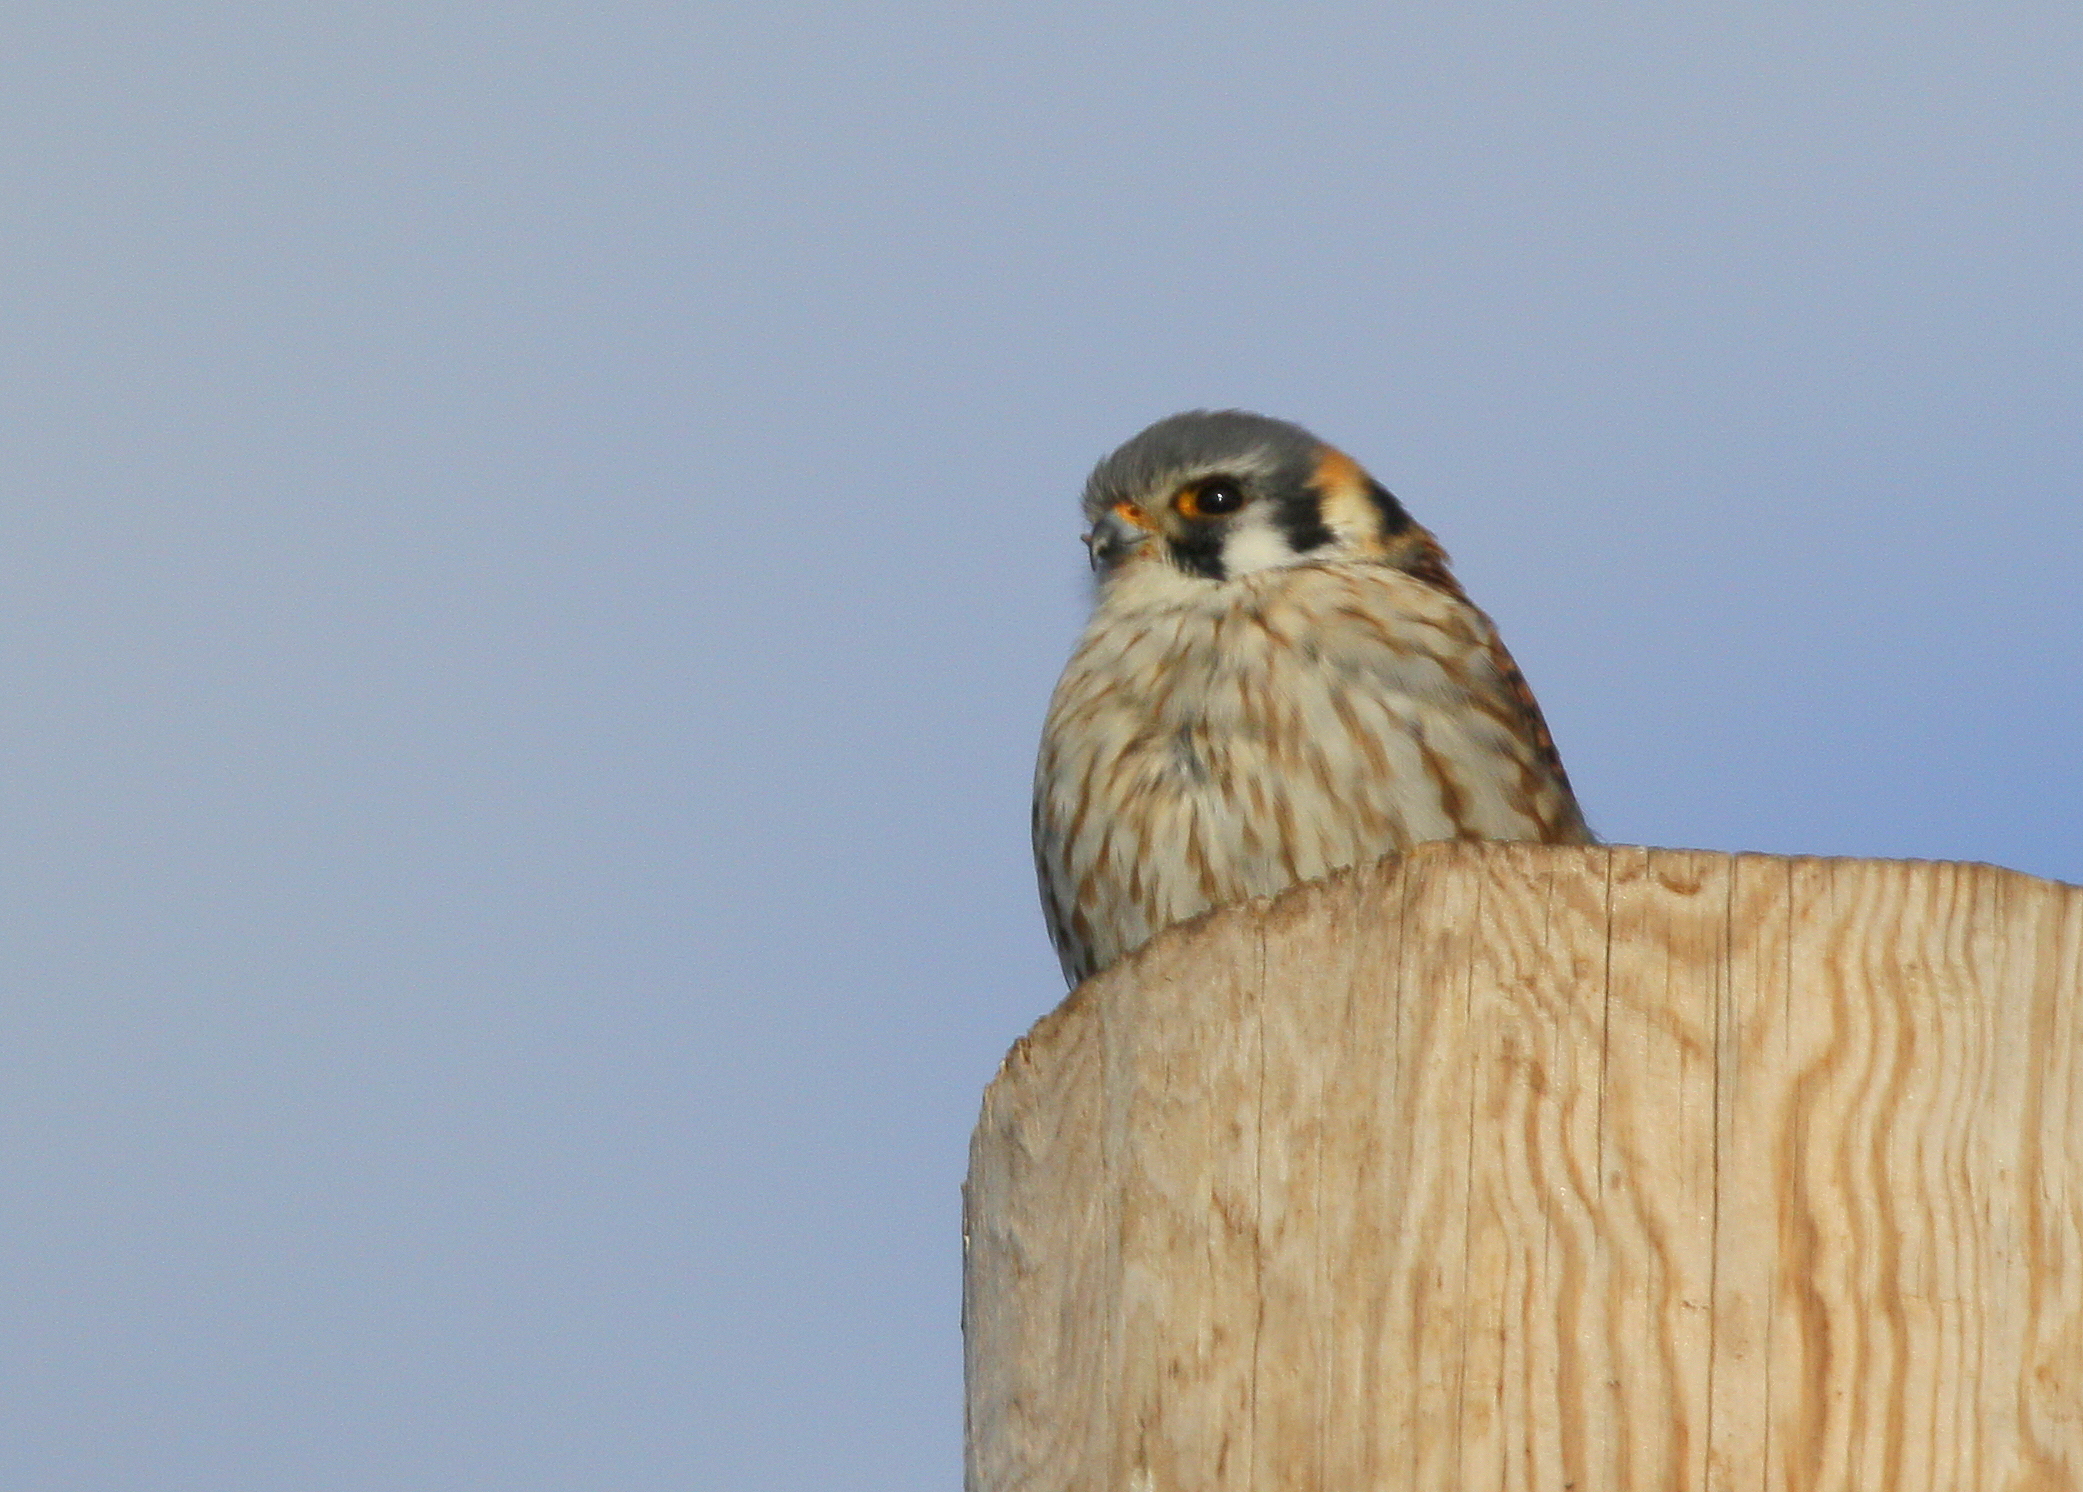 American Kestrel, female perched late afternoon light